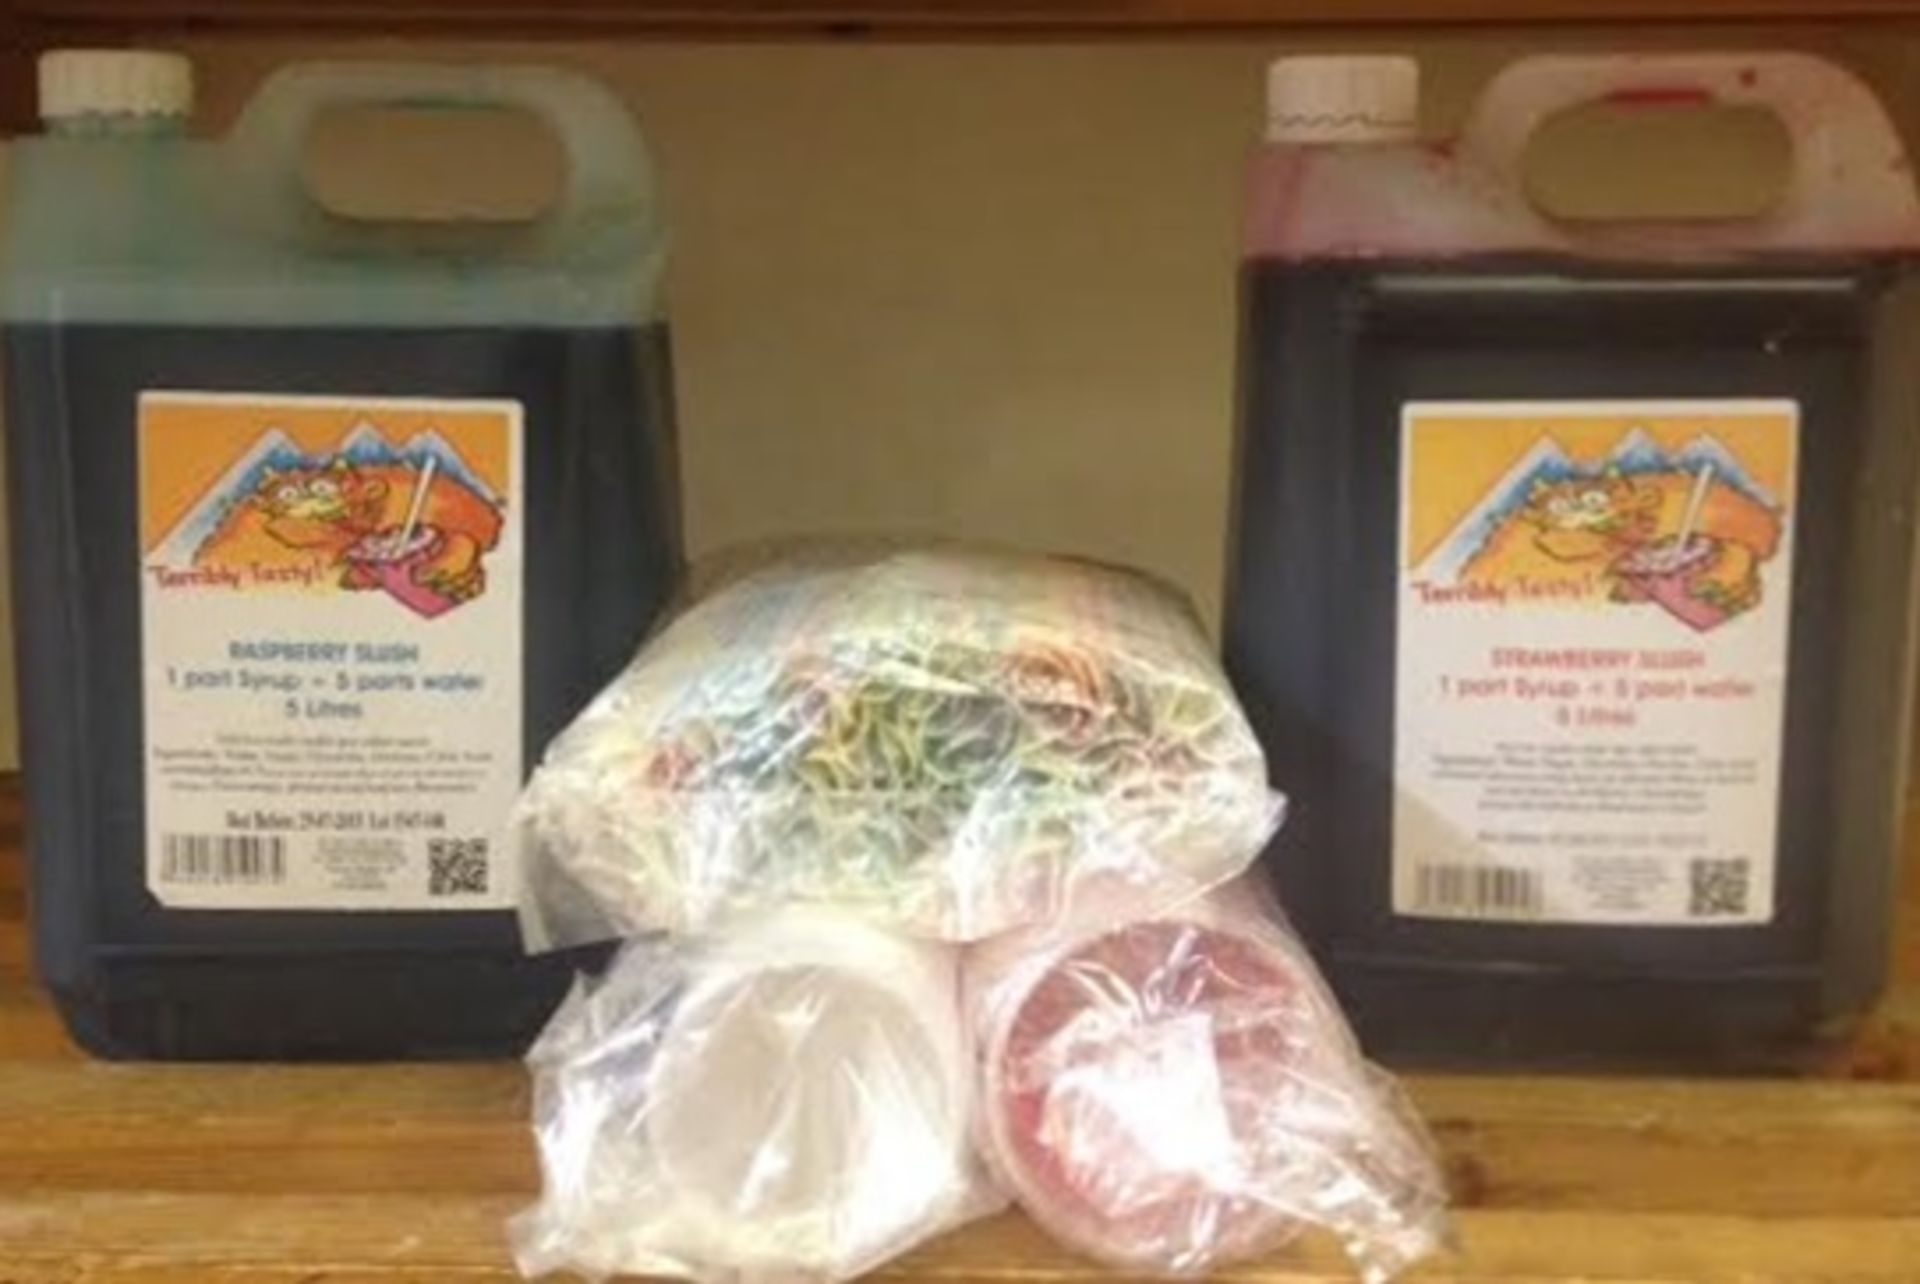 Assorted Lot of Slush Puppy Syrup, Cups and Straws - Includes 2 x 5 Litre Strawberry Syrup, 2 x 5